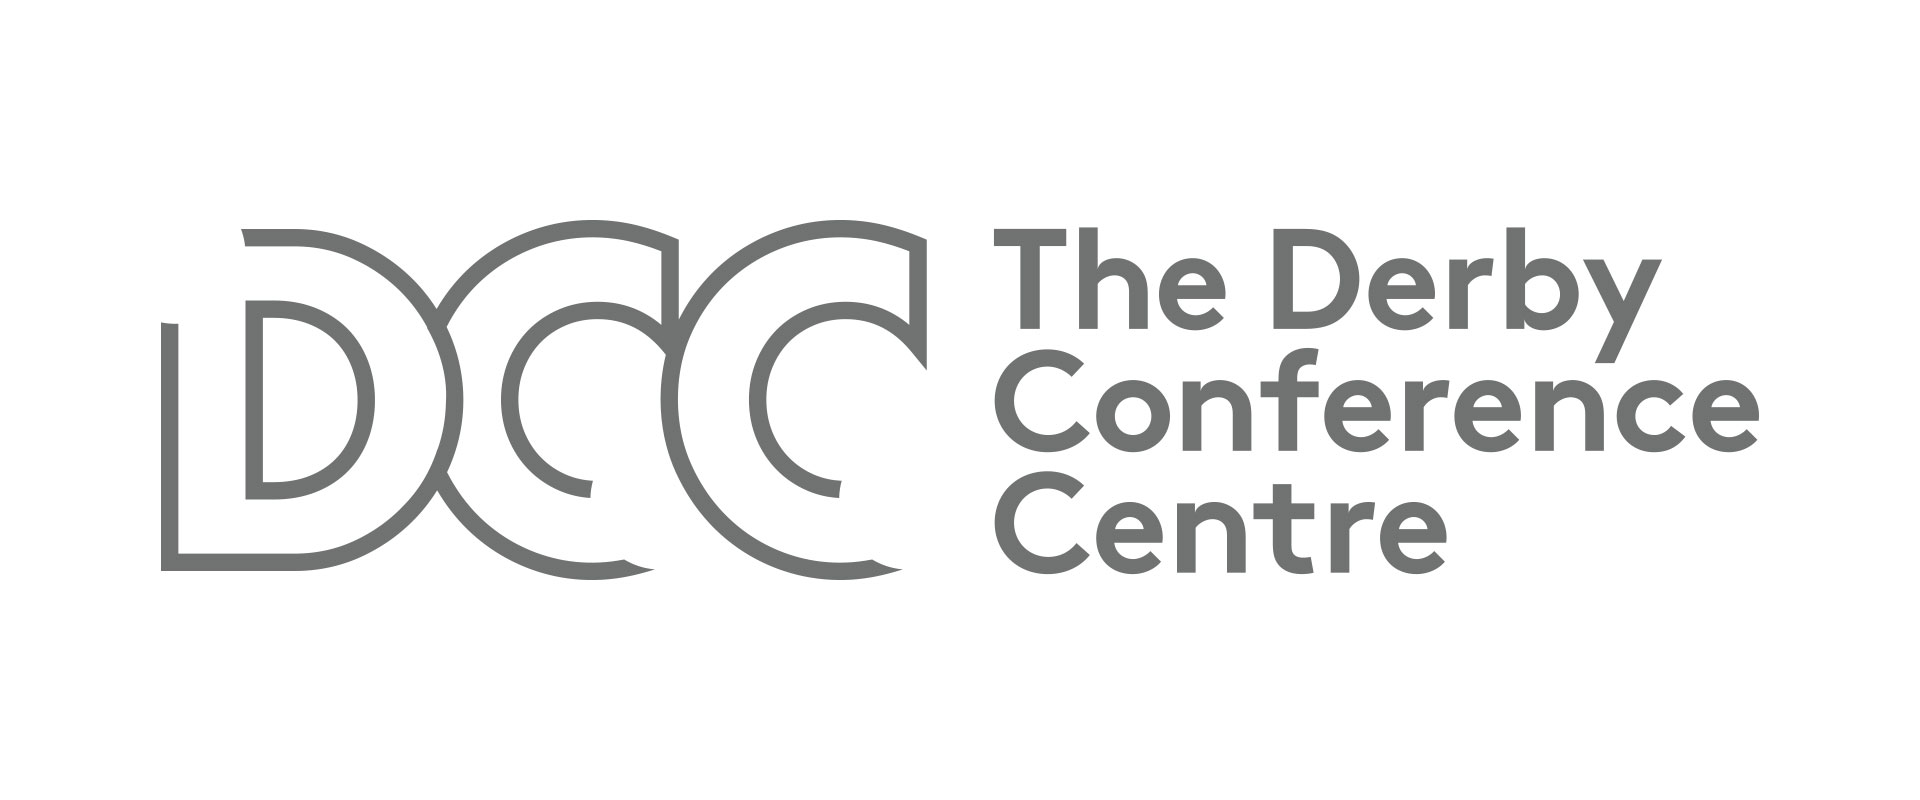 Derby Conference Centre Identity